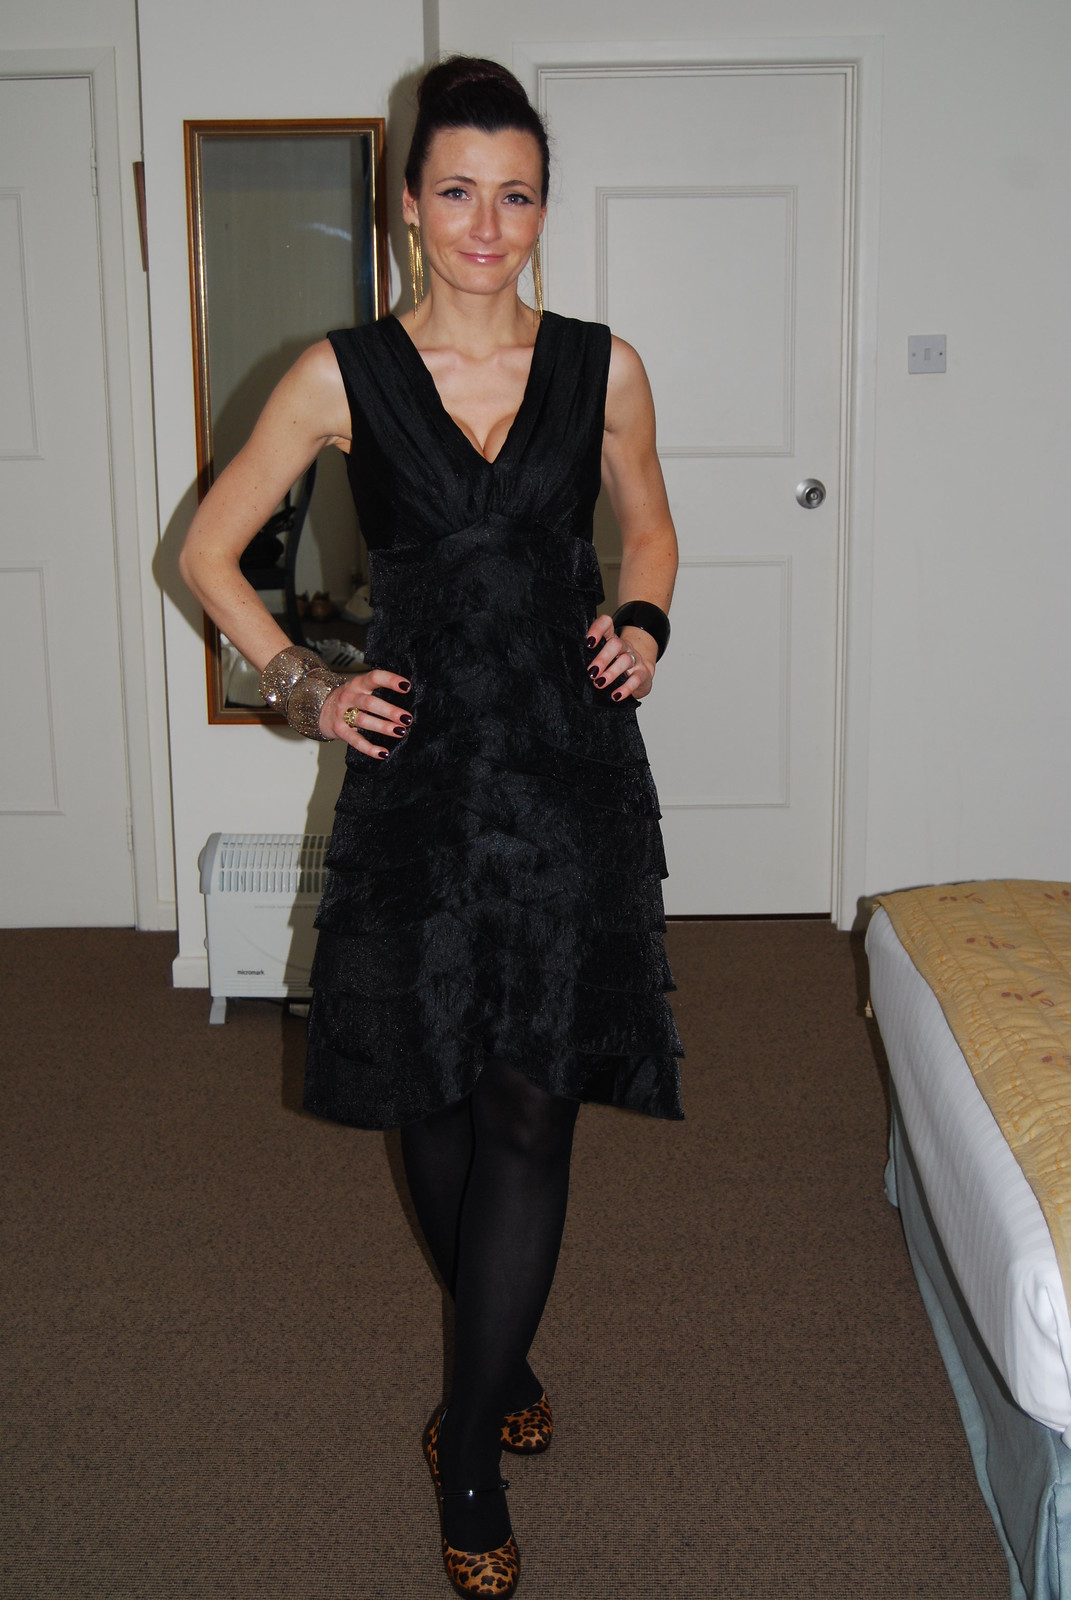 2010: My Style Through the Years | Catherine Summers, Not Dressed As Lamb Over 50 Blog